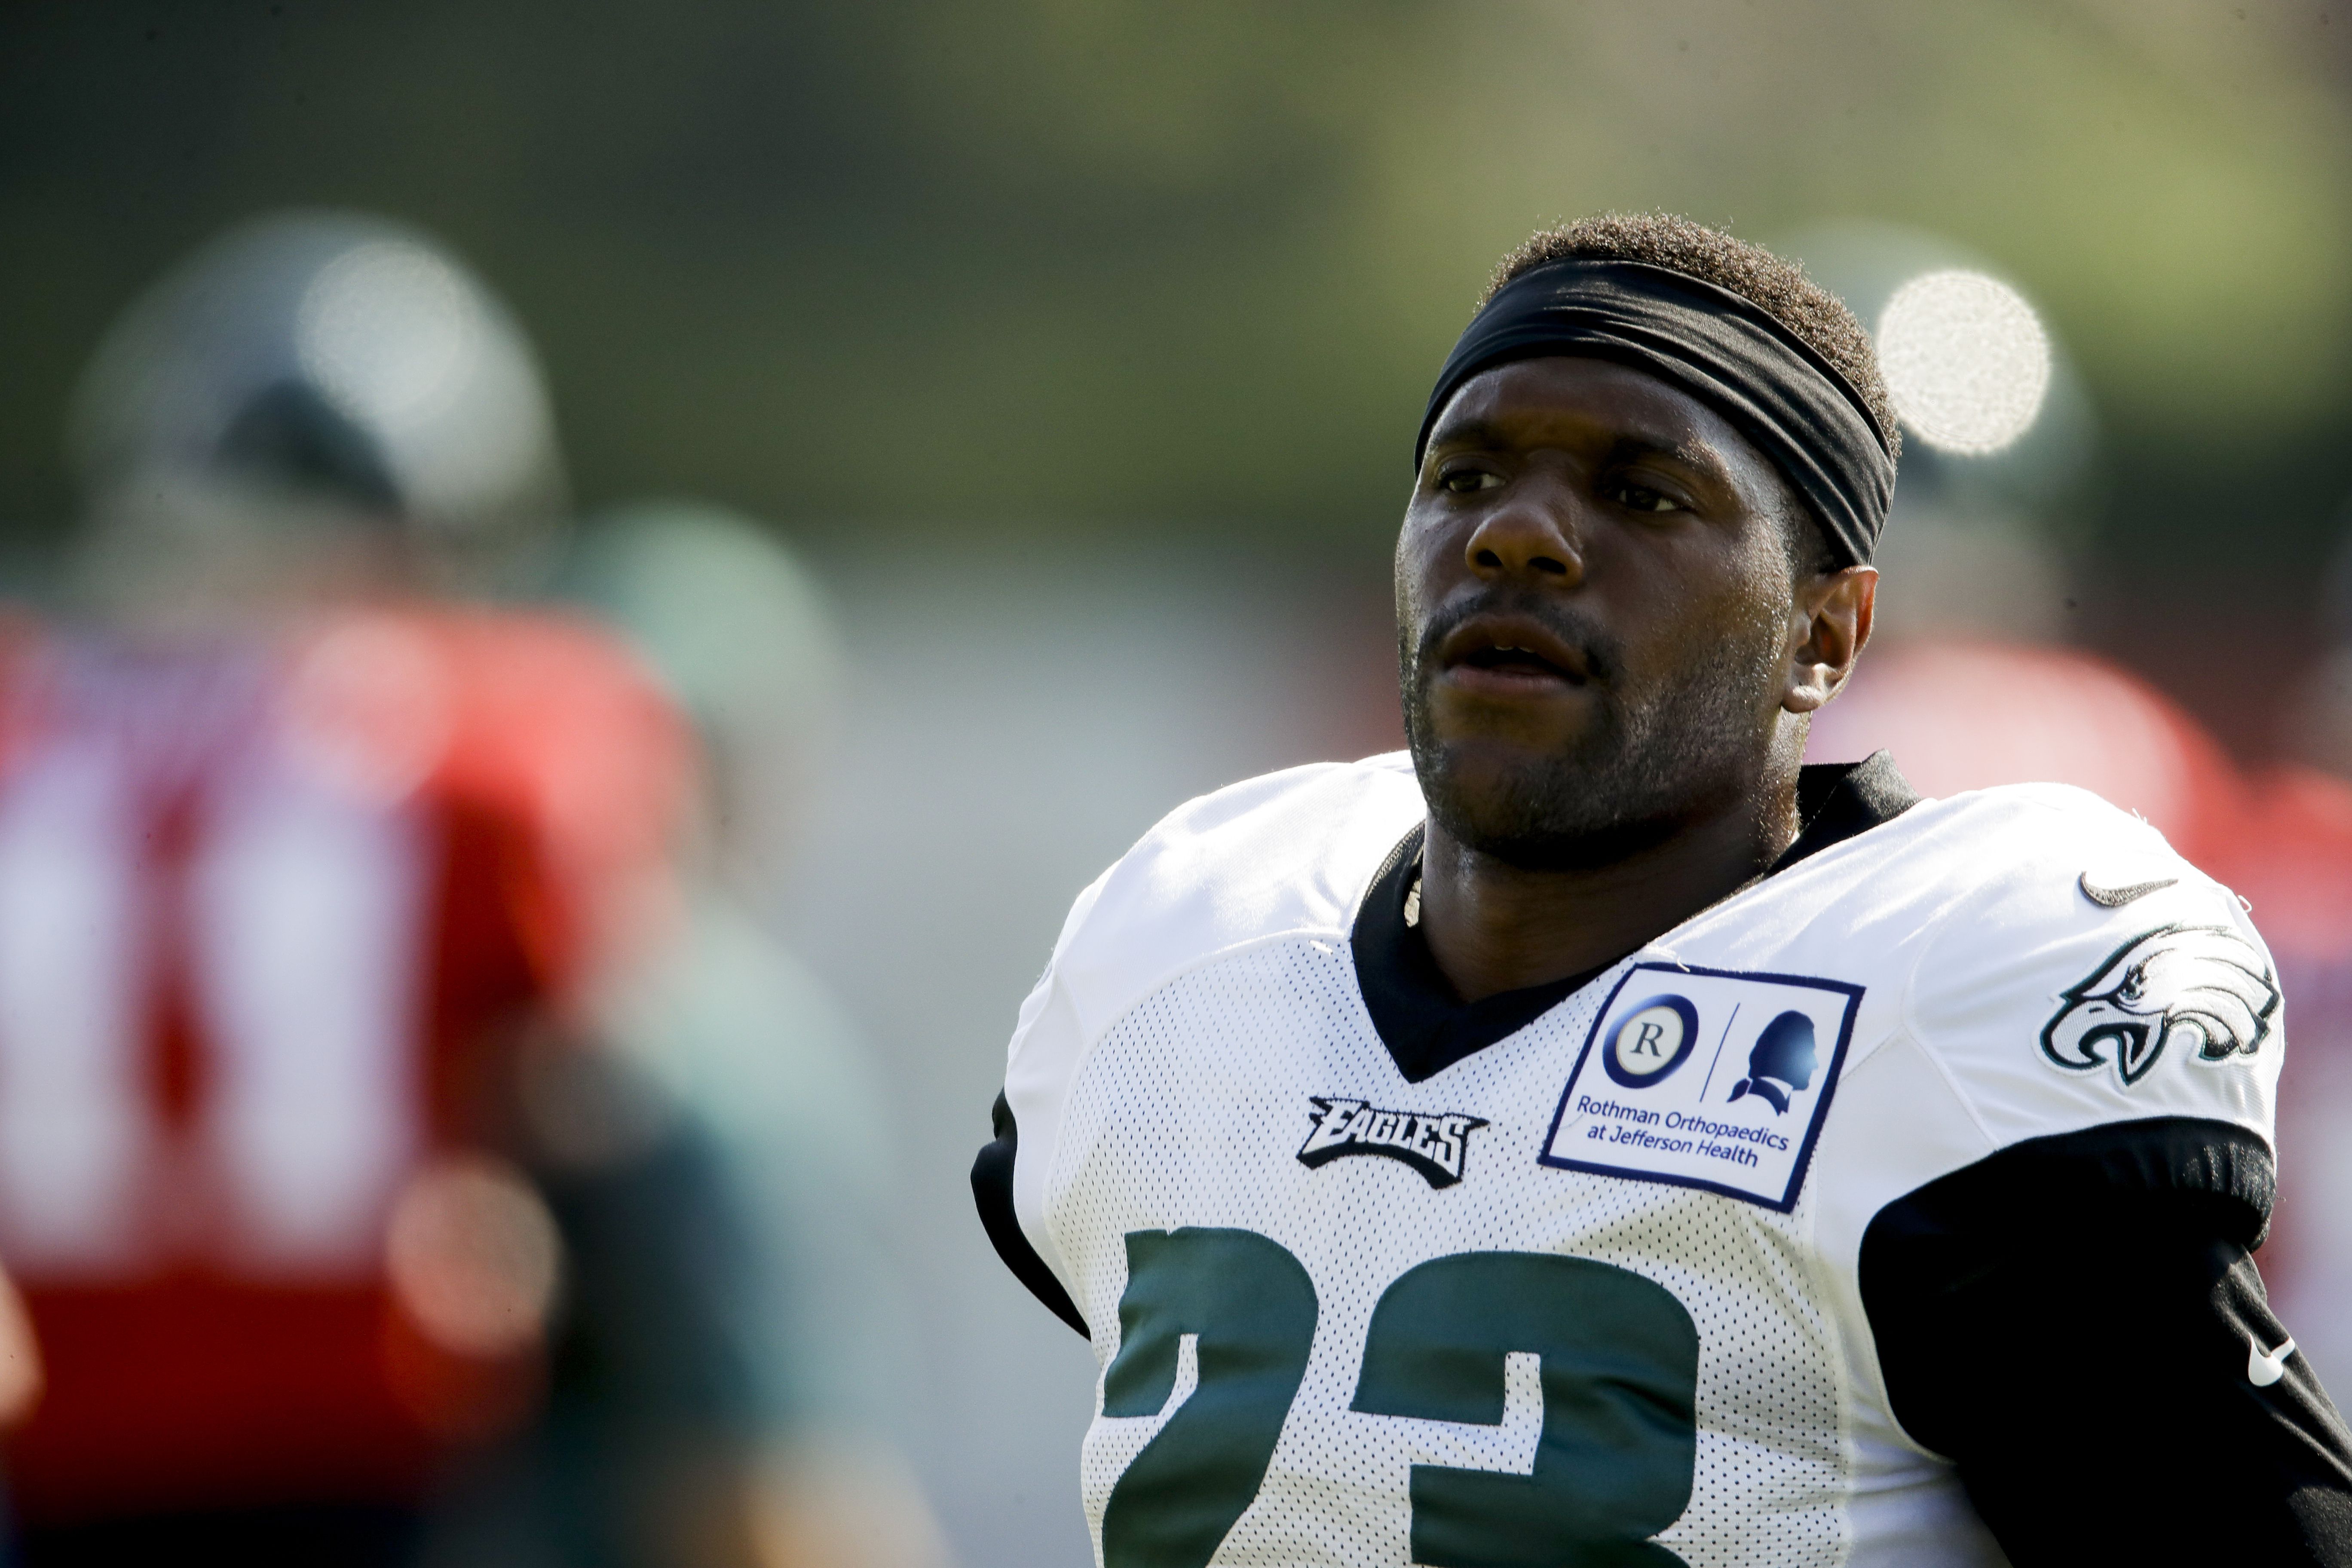 Get to know Eagles defensive backs coach Marquand Manuel